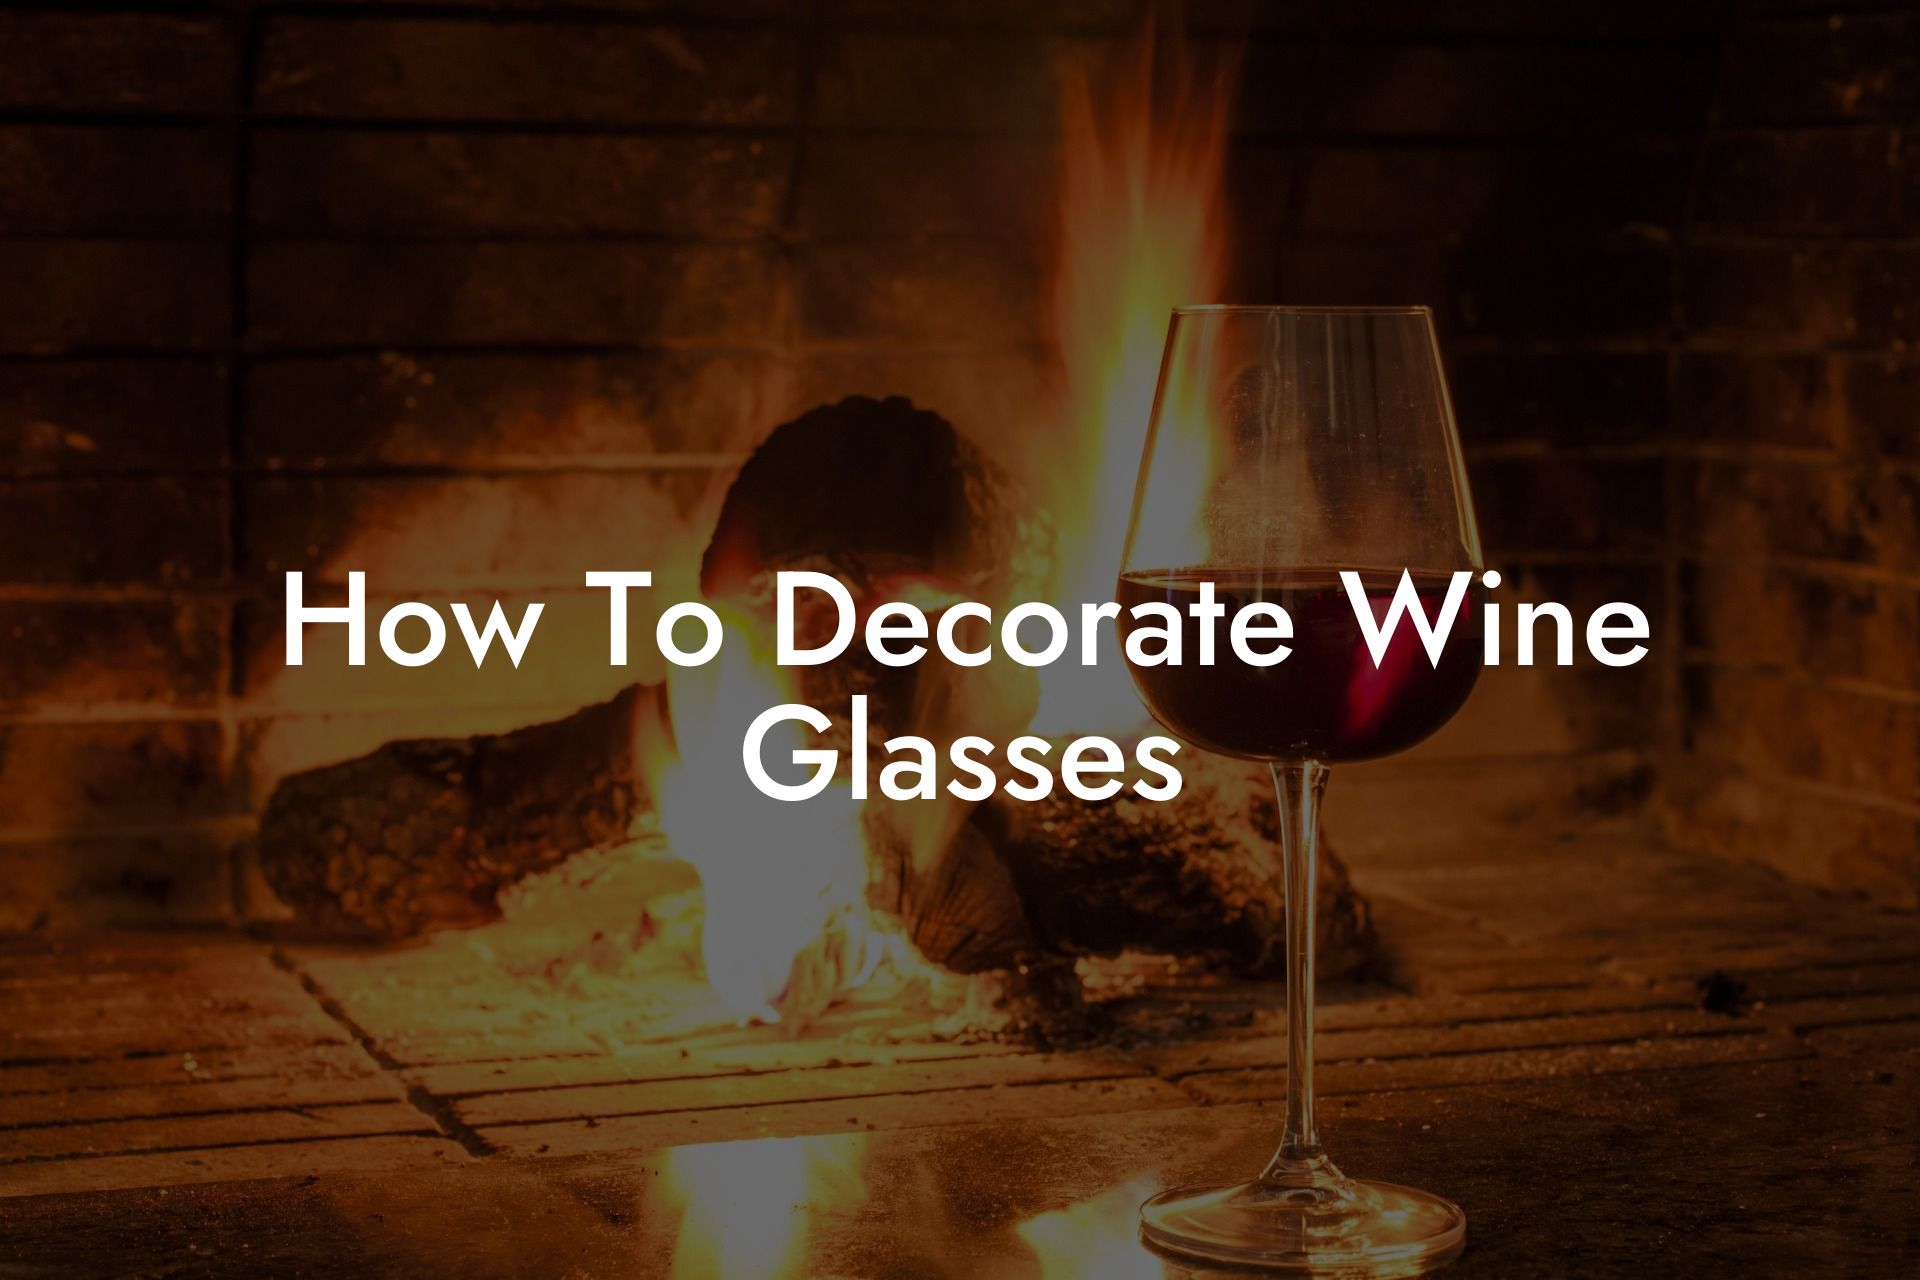 How To Decorate Wine Glasses